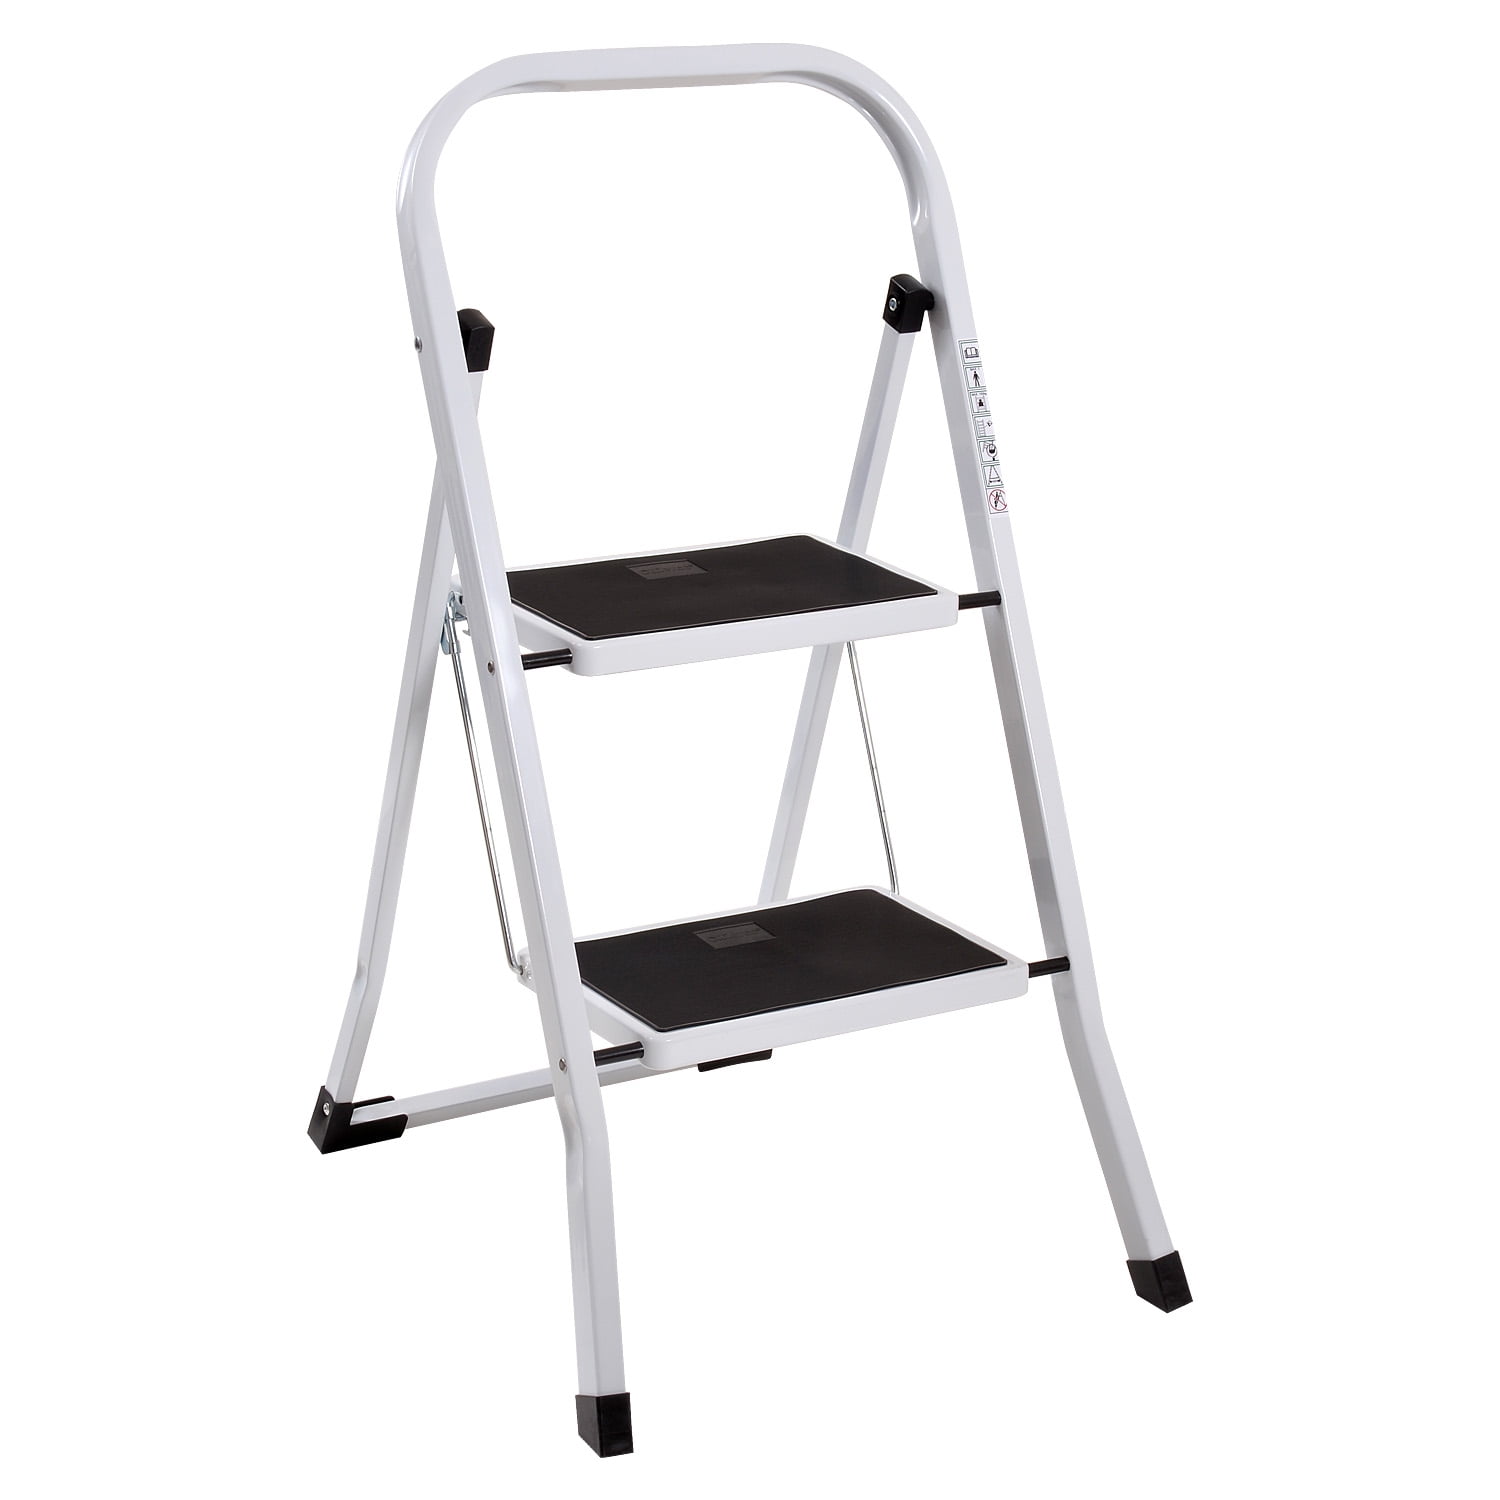 1 Or 2 Steel Step Ladder Folding Step Stool With Handle Anti-slip Solid Pedal US 